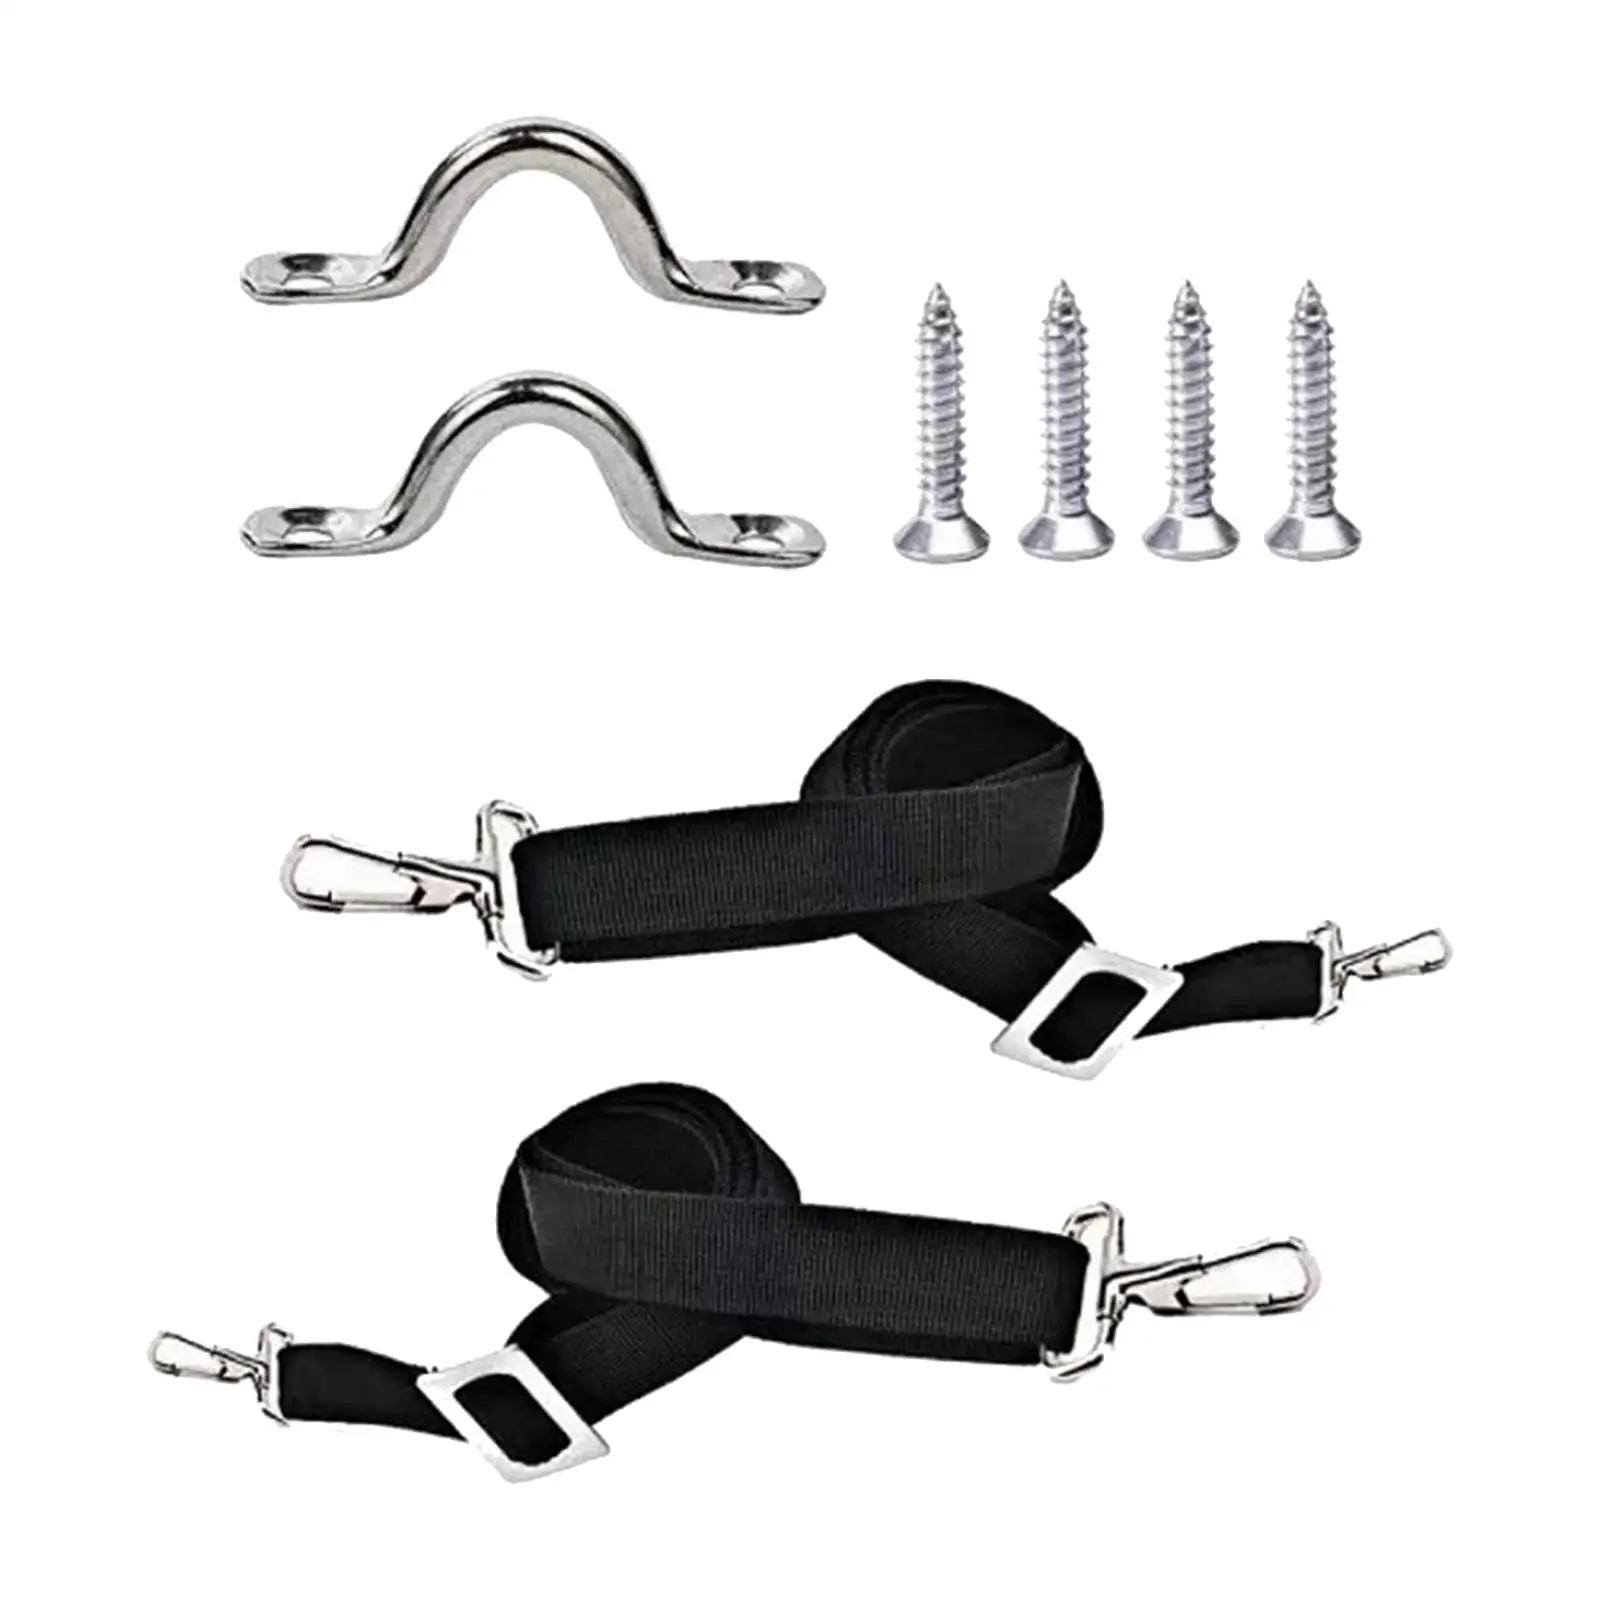 2Pcs Adjustable Bimini Top Straps Eye Straps with Loops Hook Boat Awning Hardware Accessories Boat Cover Straps for Boat